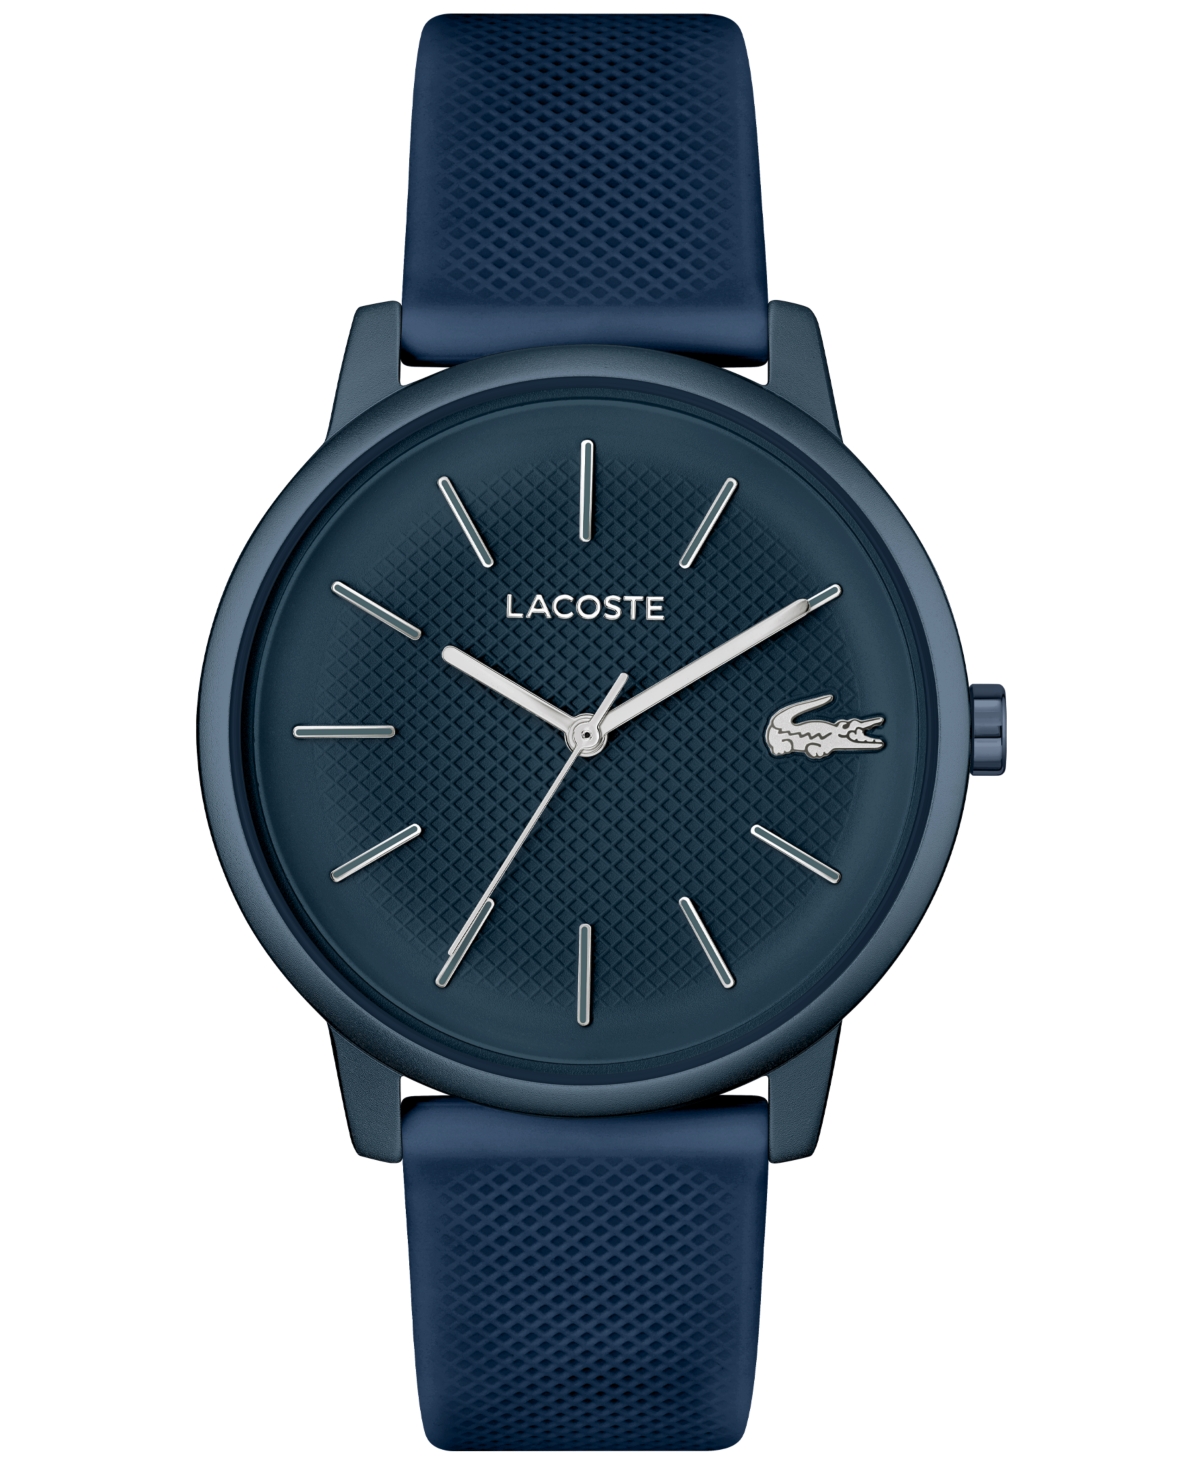 LACOSTE MEN'S L 12.12 NAVY SILICONE STRAP WATCH 42MM